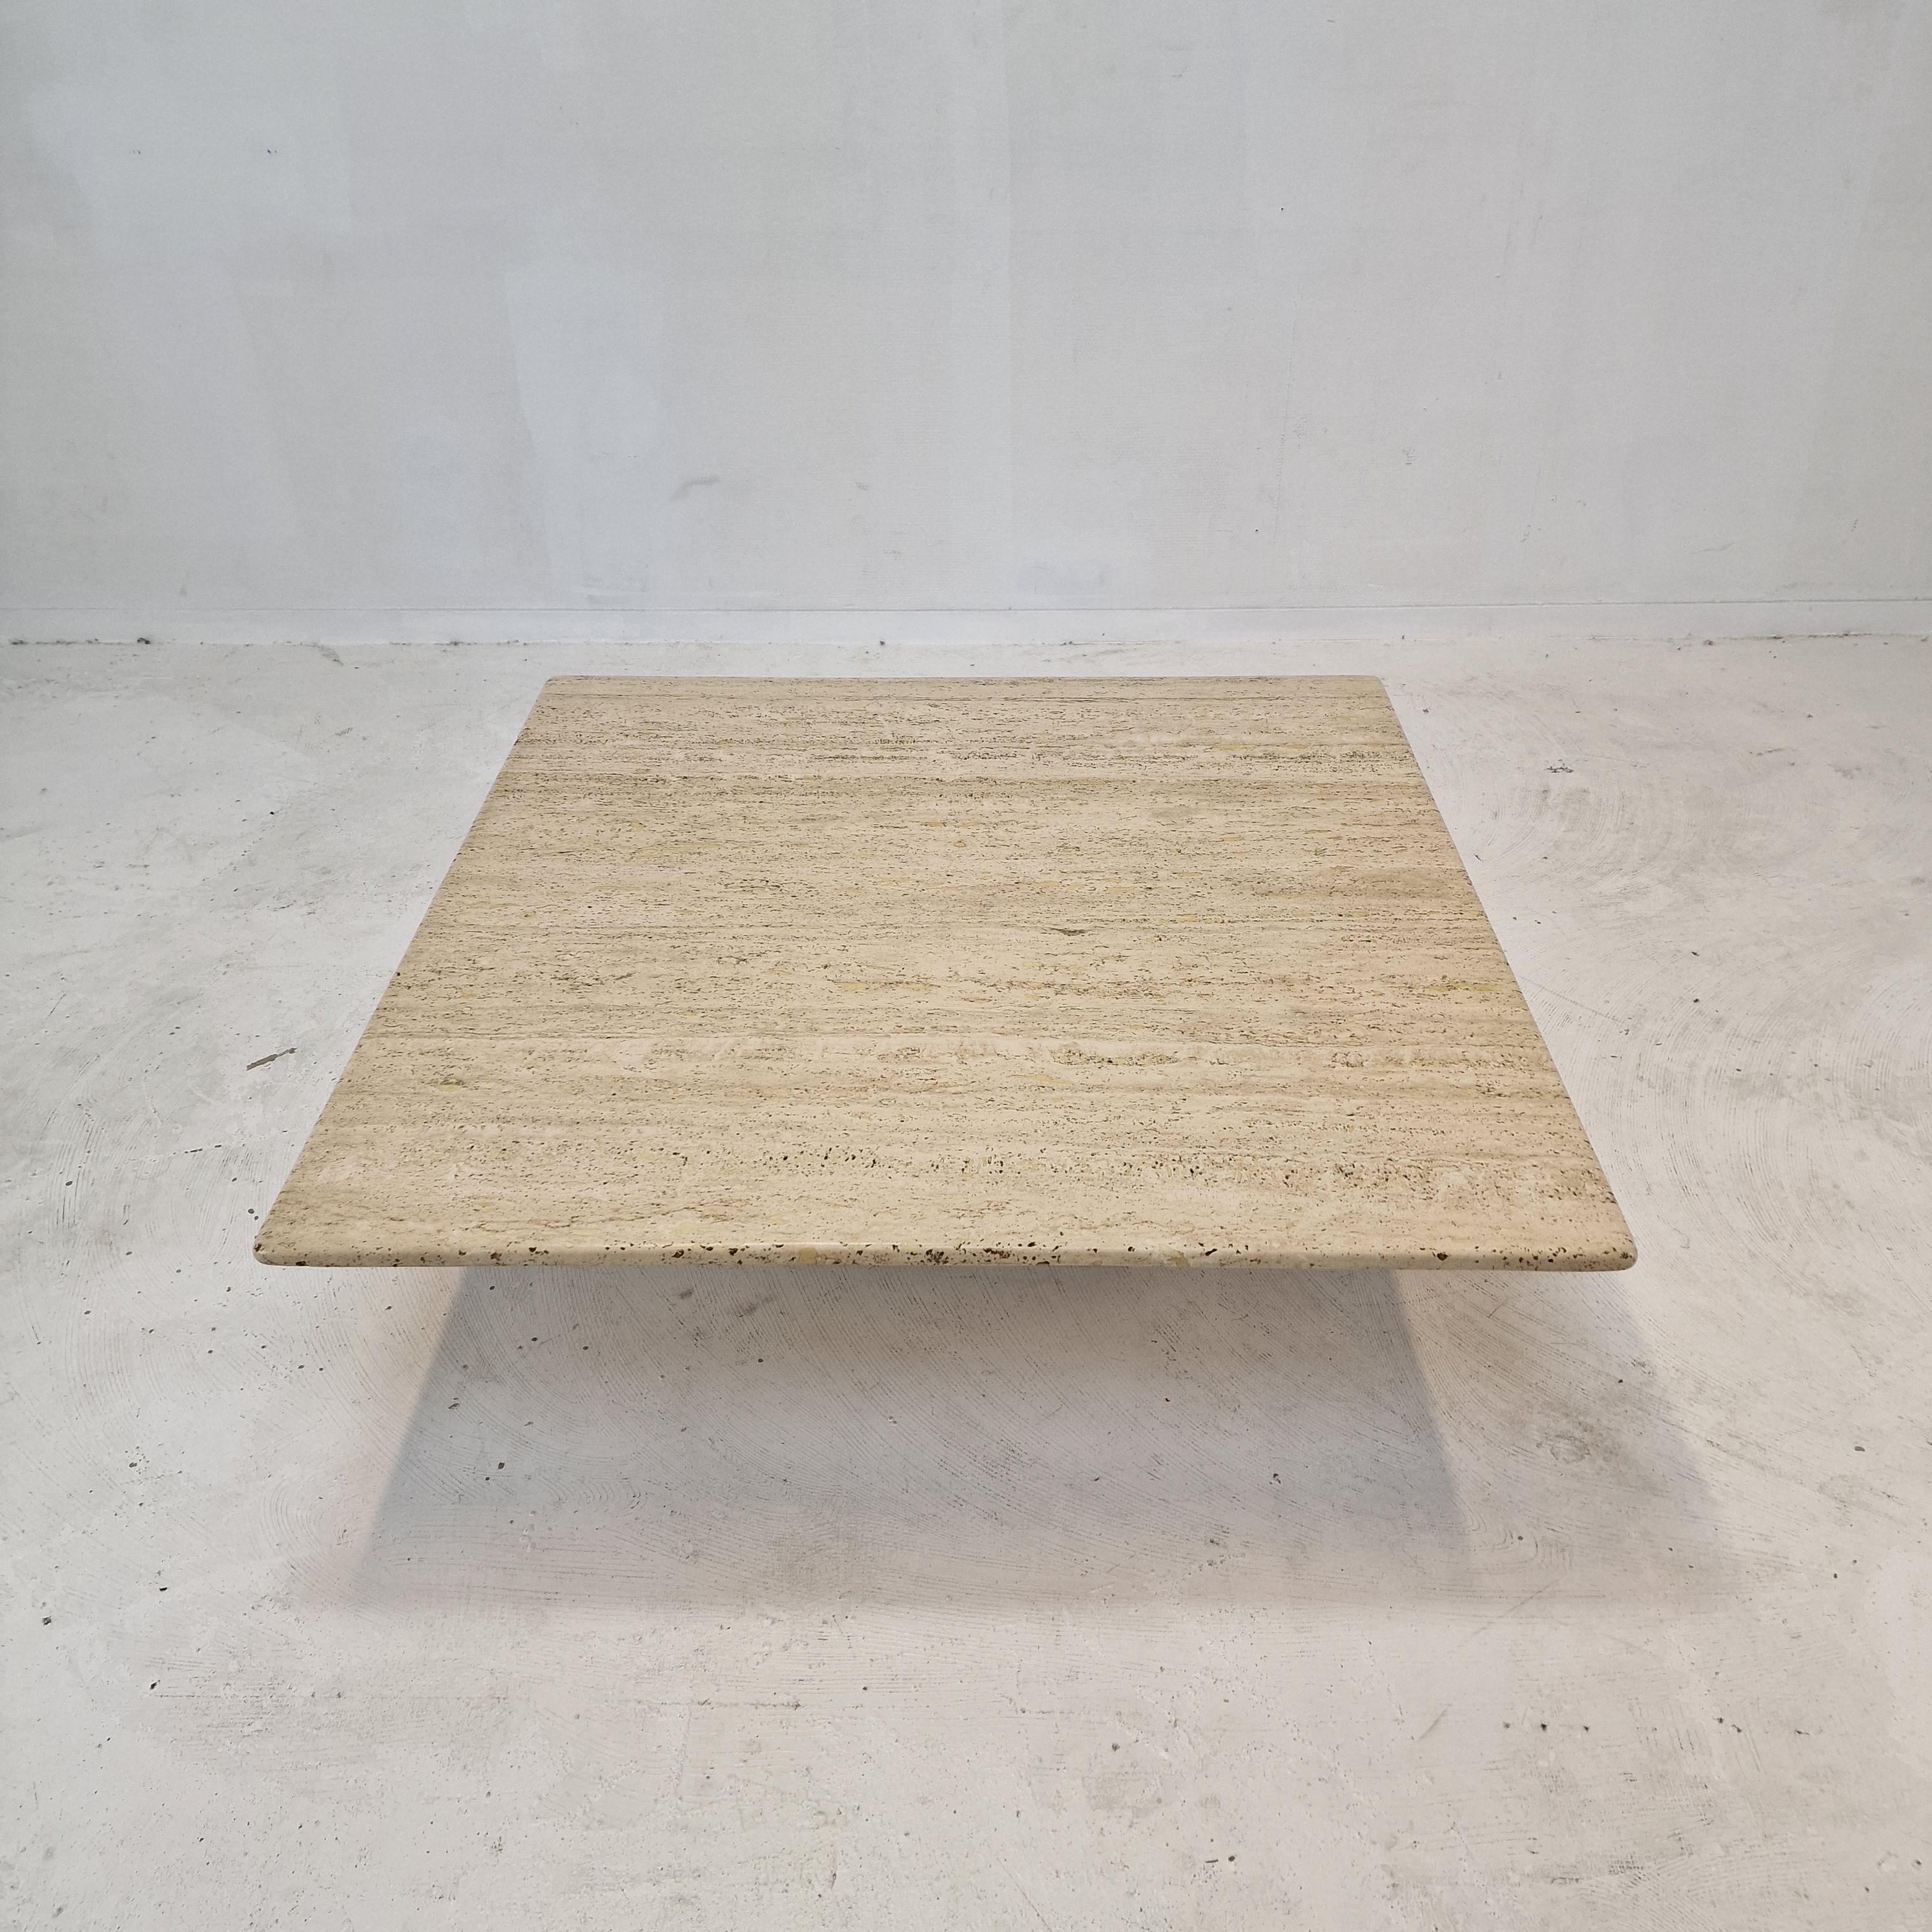 Hand-Crafted Italian Square Coffee Table in Travertine, 1980s For Sale